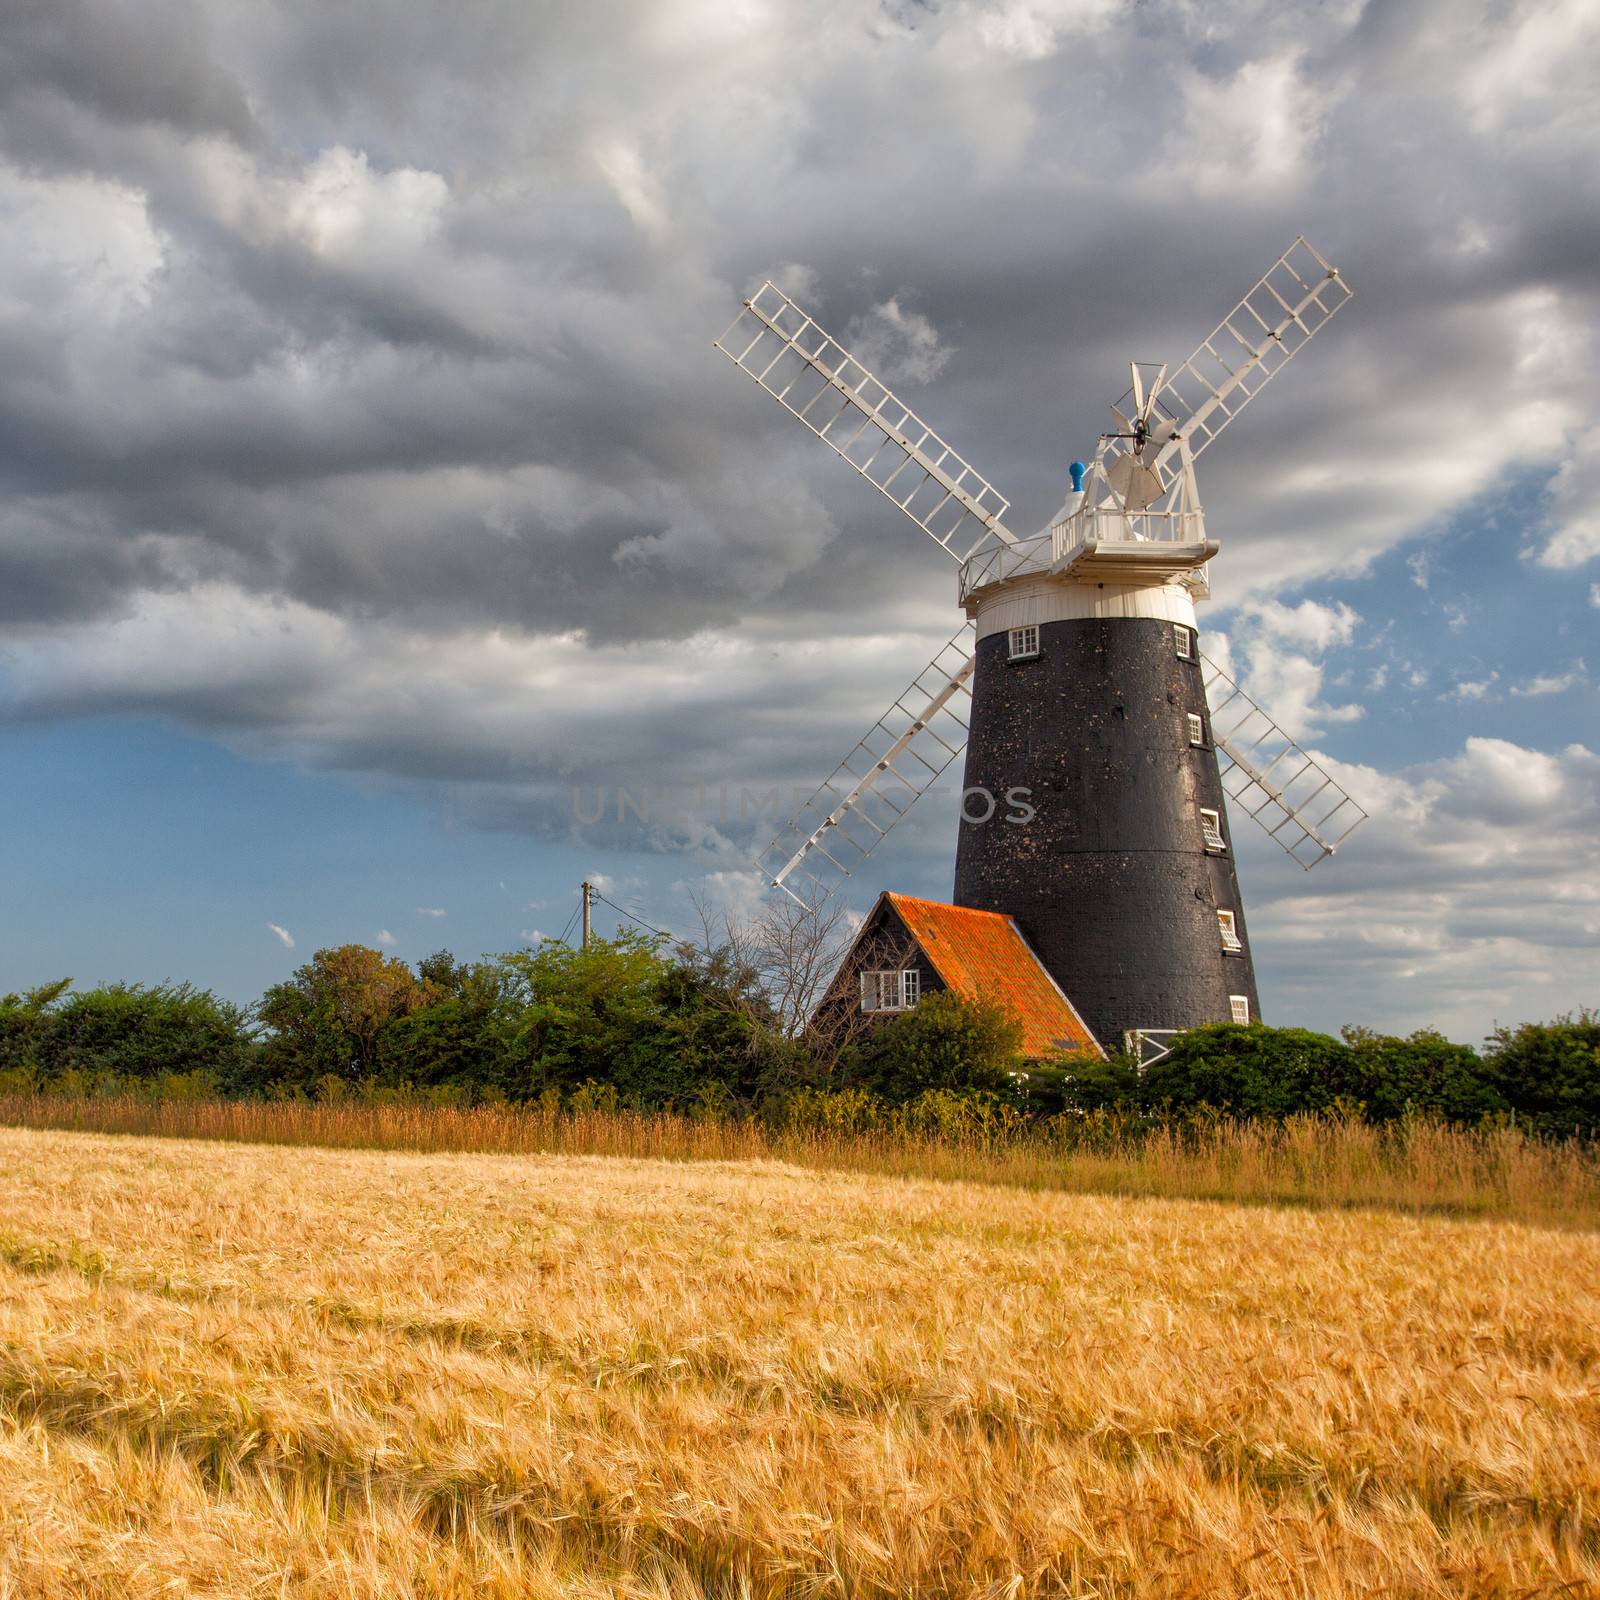 Old windmill in England by CaptureLight